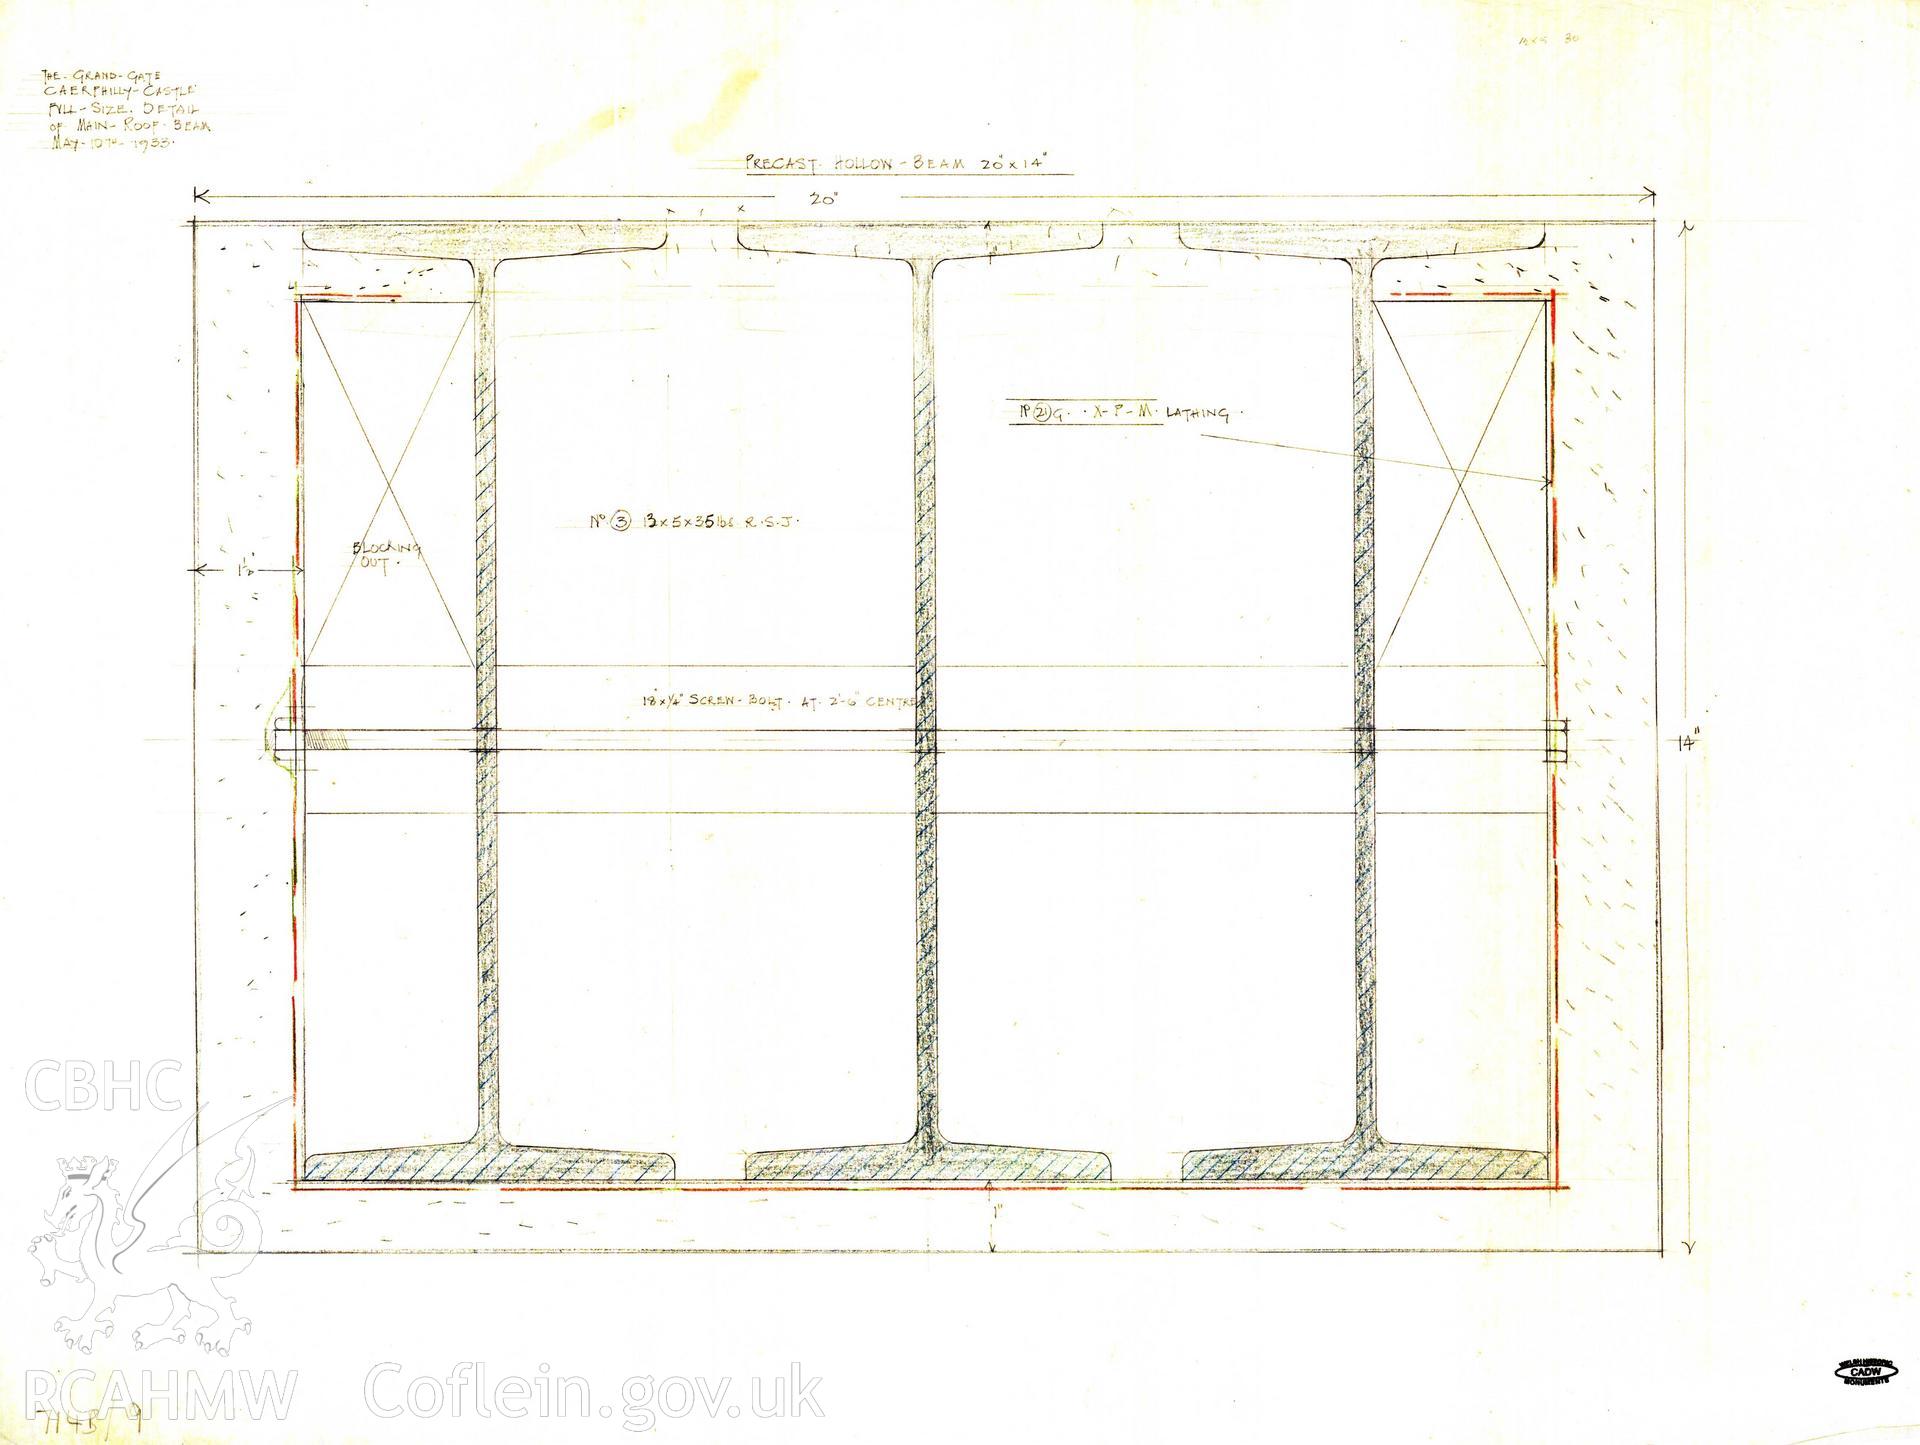 Digital copy of Cadw guardianship monument drawing of Caerphilly Castle. Outer E gate, precast roof beam. Cadw ref. no: 714B/9. Scale 1:1.Original drawing withdrawn and returned to Cadw at their request.